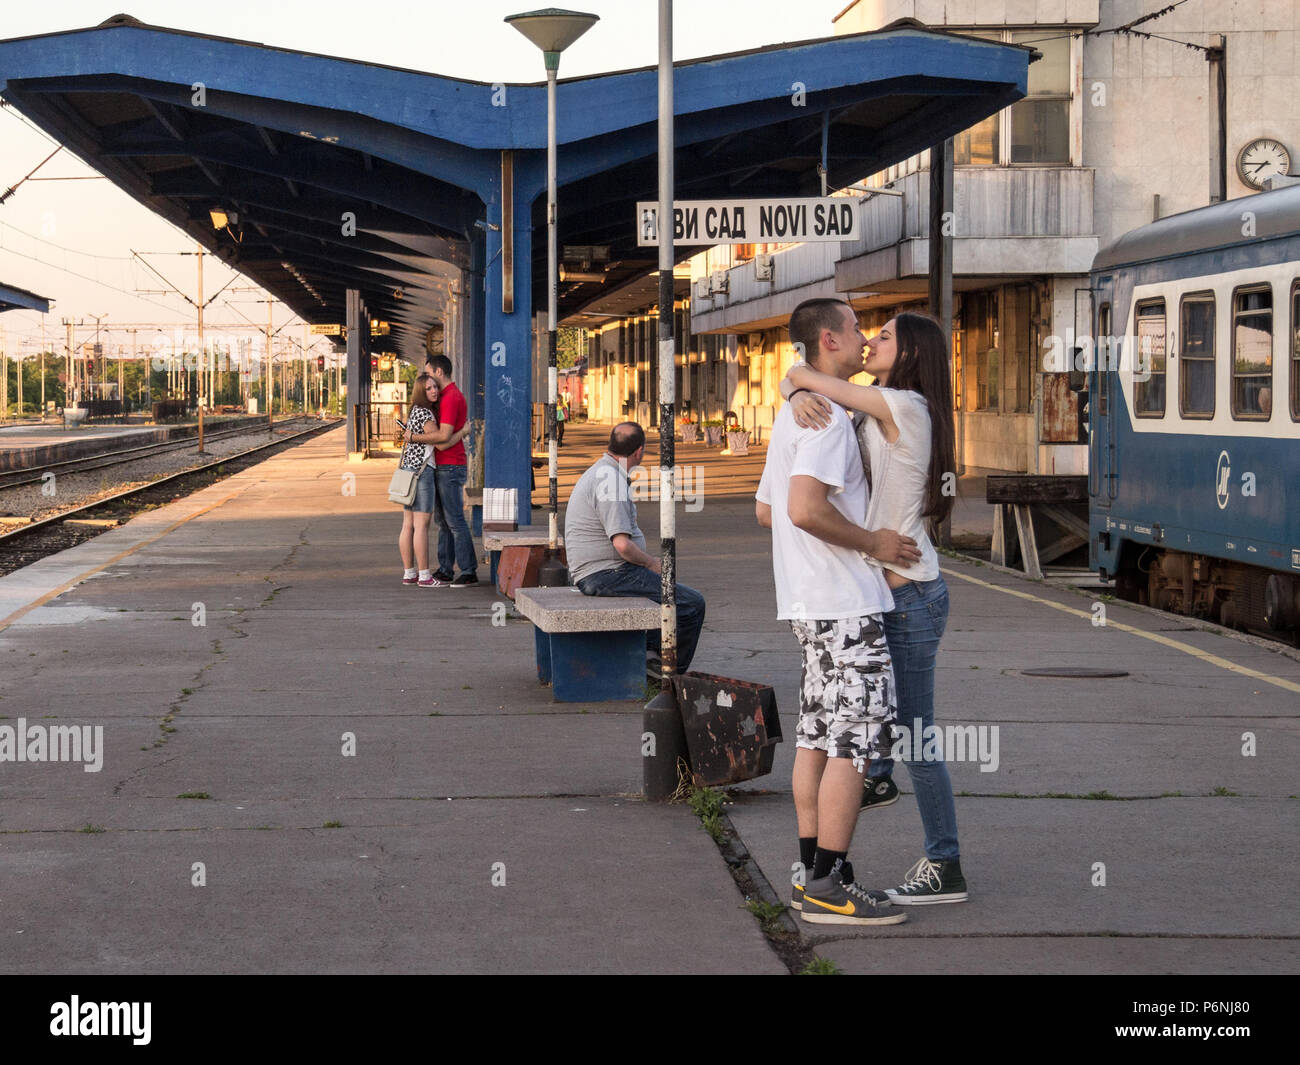 NOVI SAD, SERBIA - MAY 30, 2015, 2015: Two couples of white caucasian male and females kissing in Novi Sad train station waiting for the train that wi Stock Photo